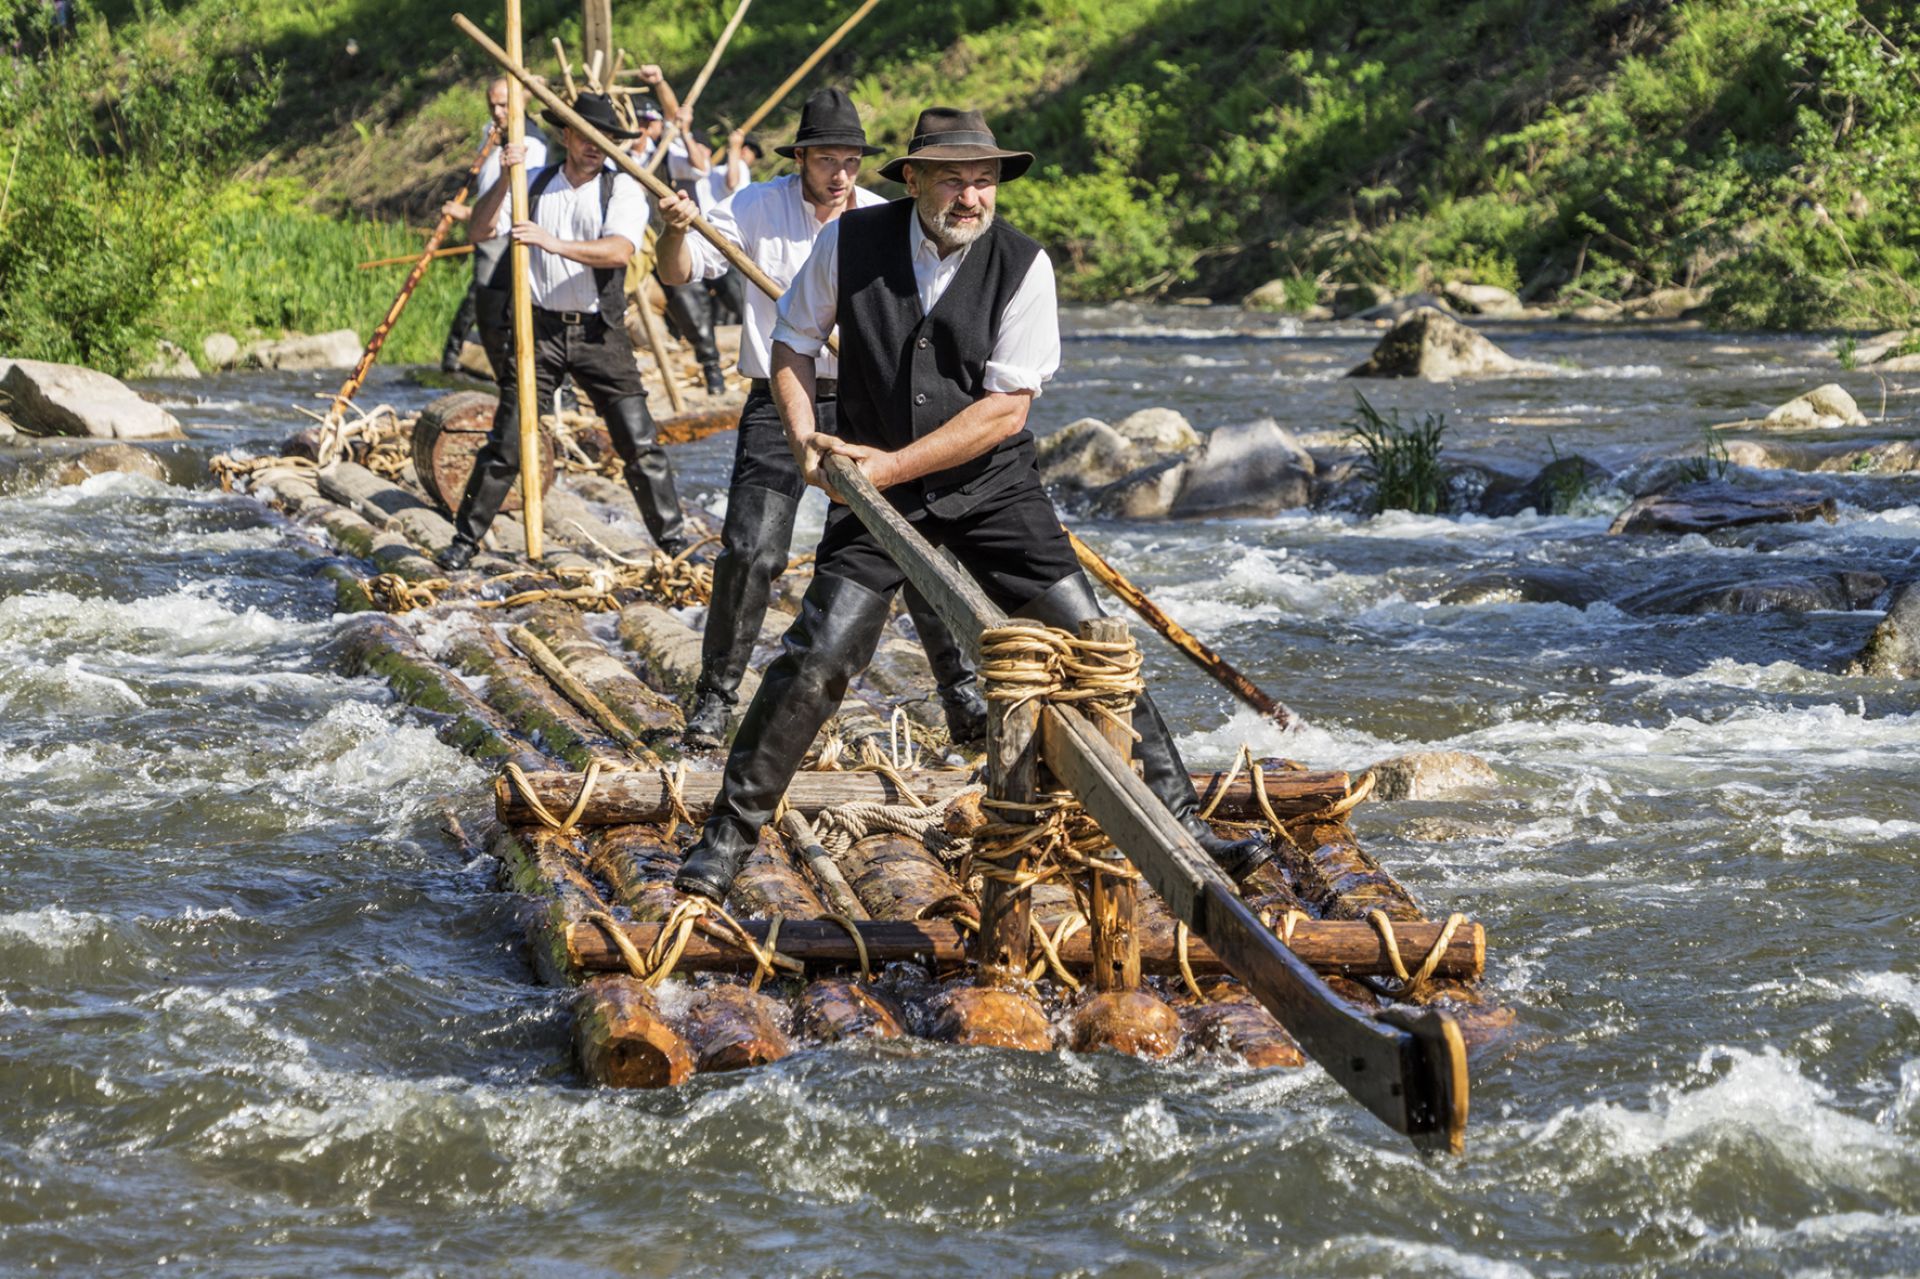 Younger and older rafters are concentrated while steering the timber raft on the wild river, Germany